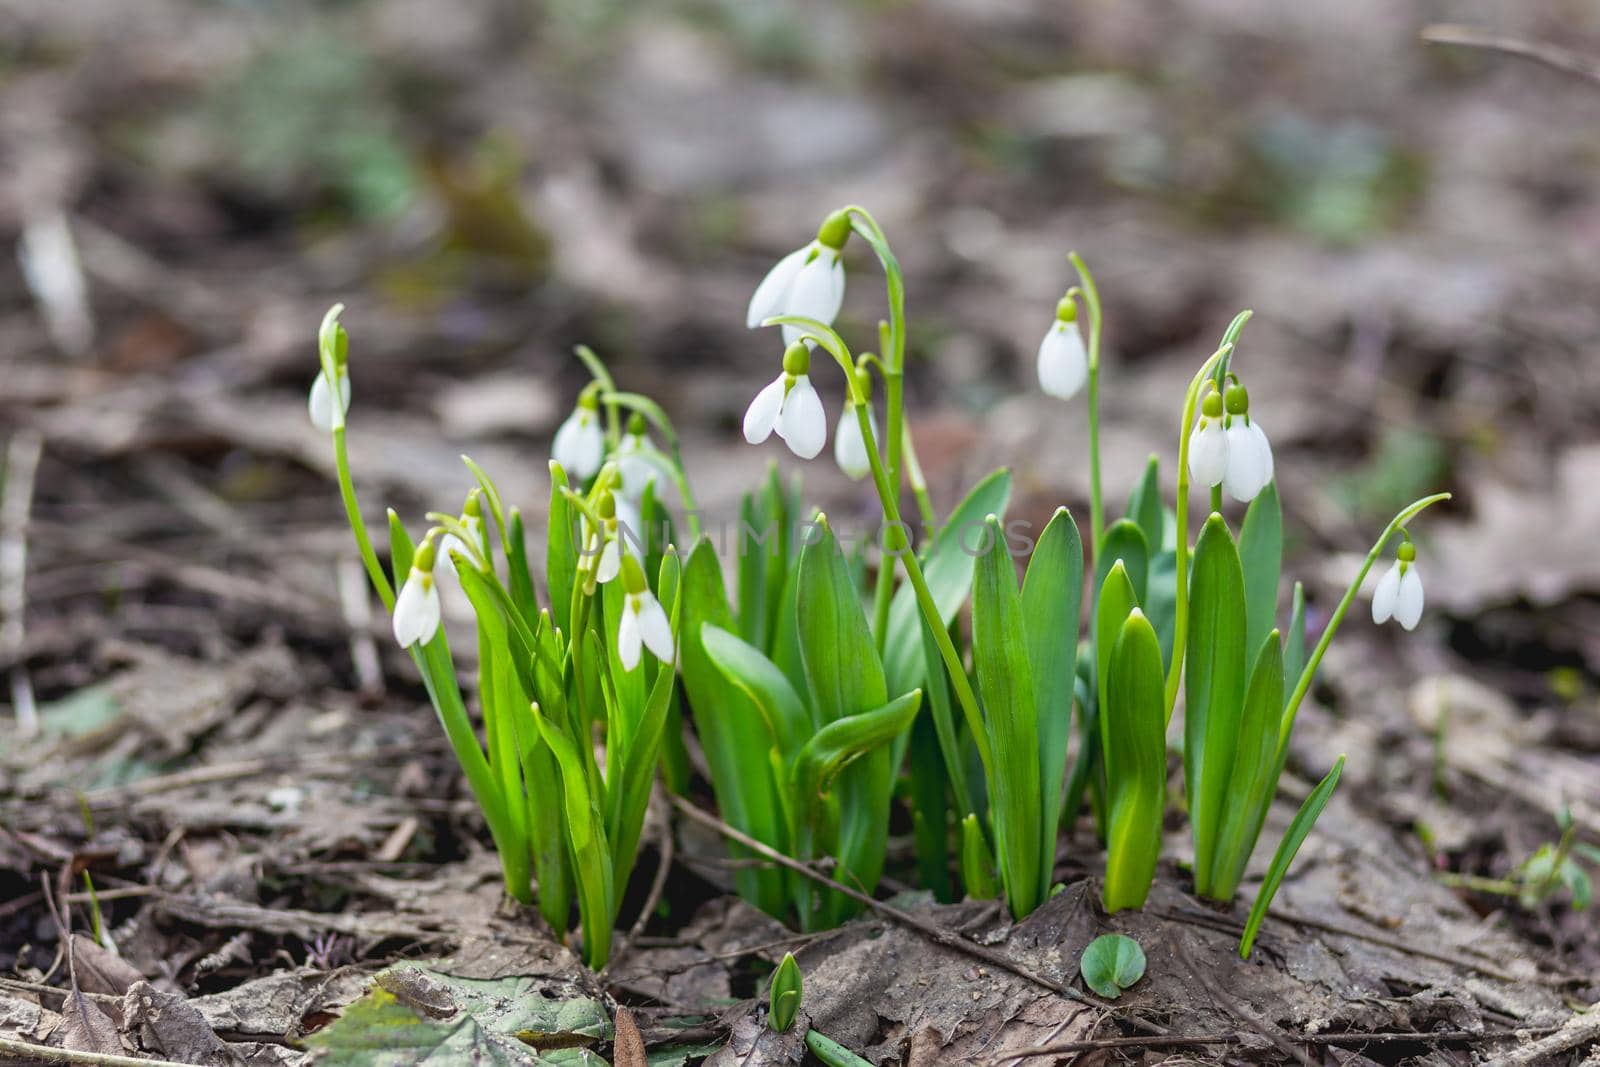 Snowdrops makes its way through snow and fallen leaves. First spring flowers in bloom - Galanthus. by aksenovko